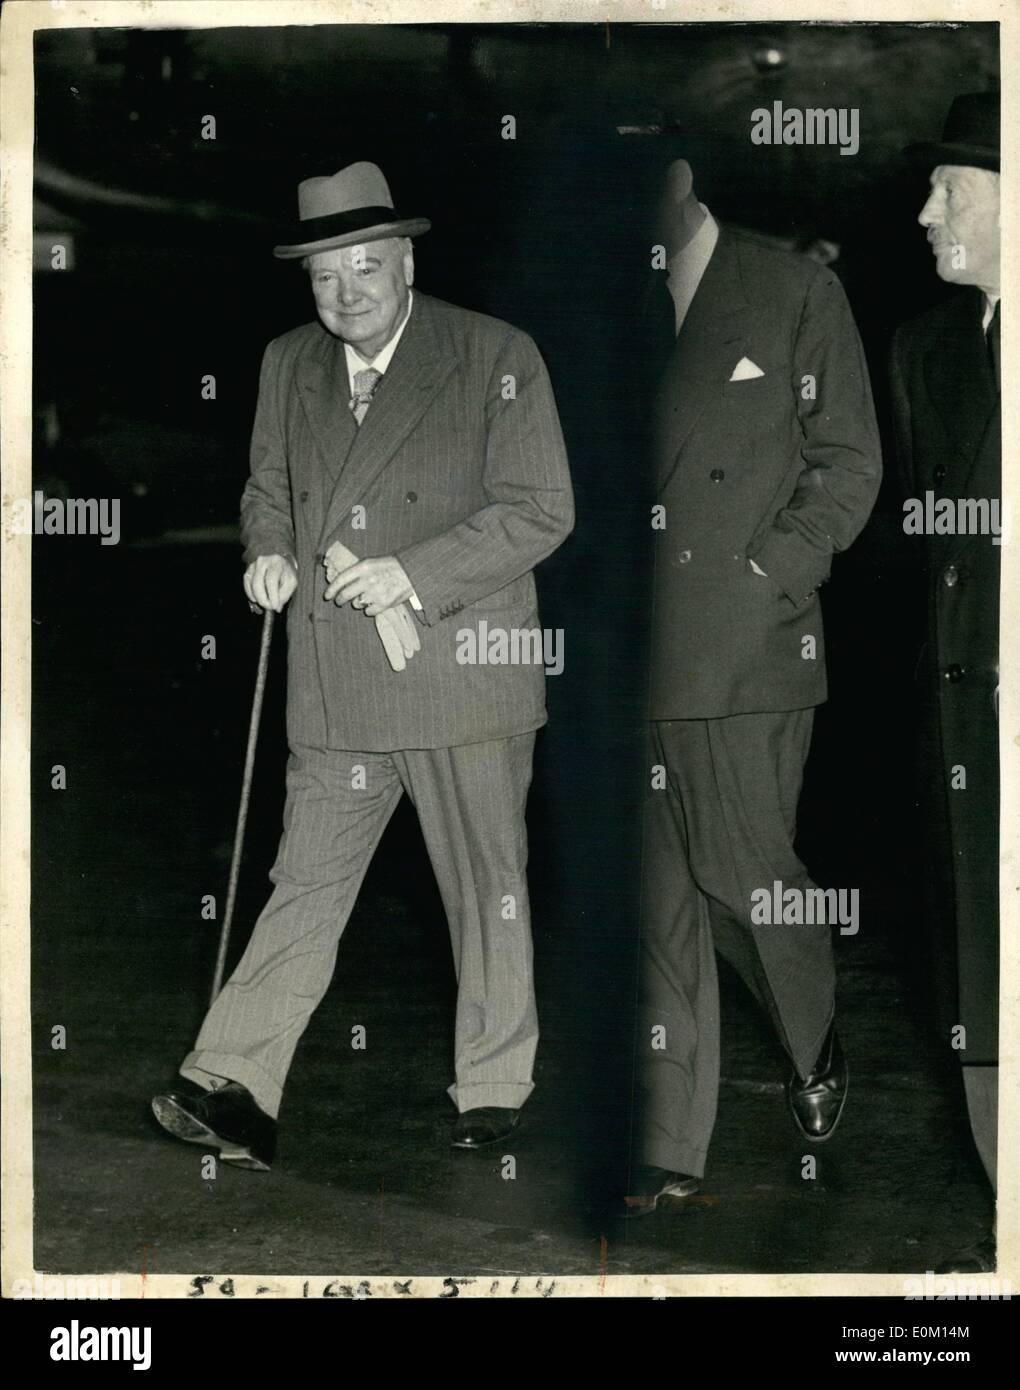 Feb. 30, 1953 - 30-2-53 Prime Minister returns to London by air from his holiday near Nice. Sir Winston Churchill, who has been spending a holiday at Lord Beaverbrook's villa at Cap D'Ail, near Nice, returned to London by Air this evening. Photo Shows: Sir Winston Churchill walking across the tarmac after arriving by air at London Airport this evening. Stock Photo